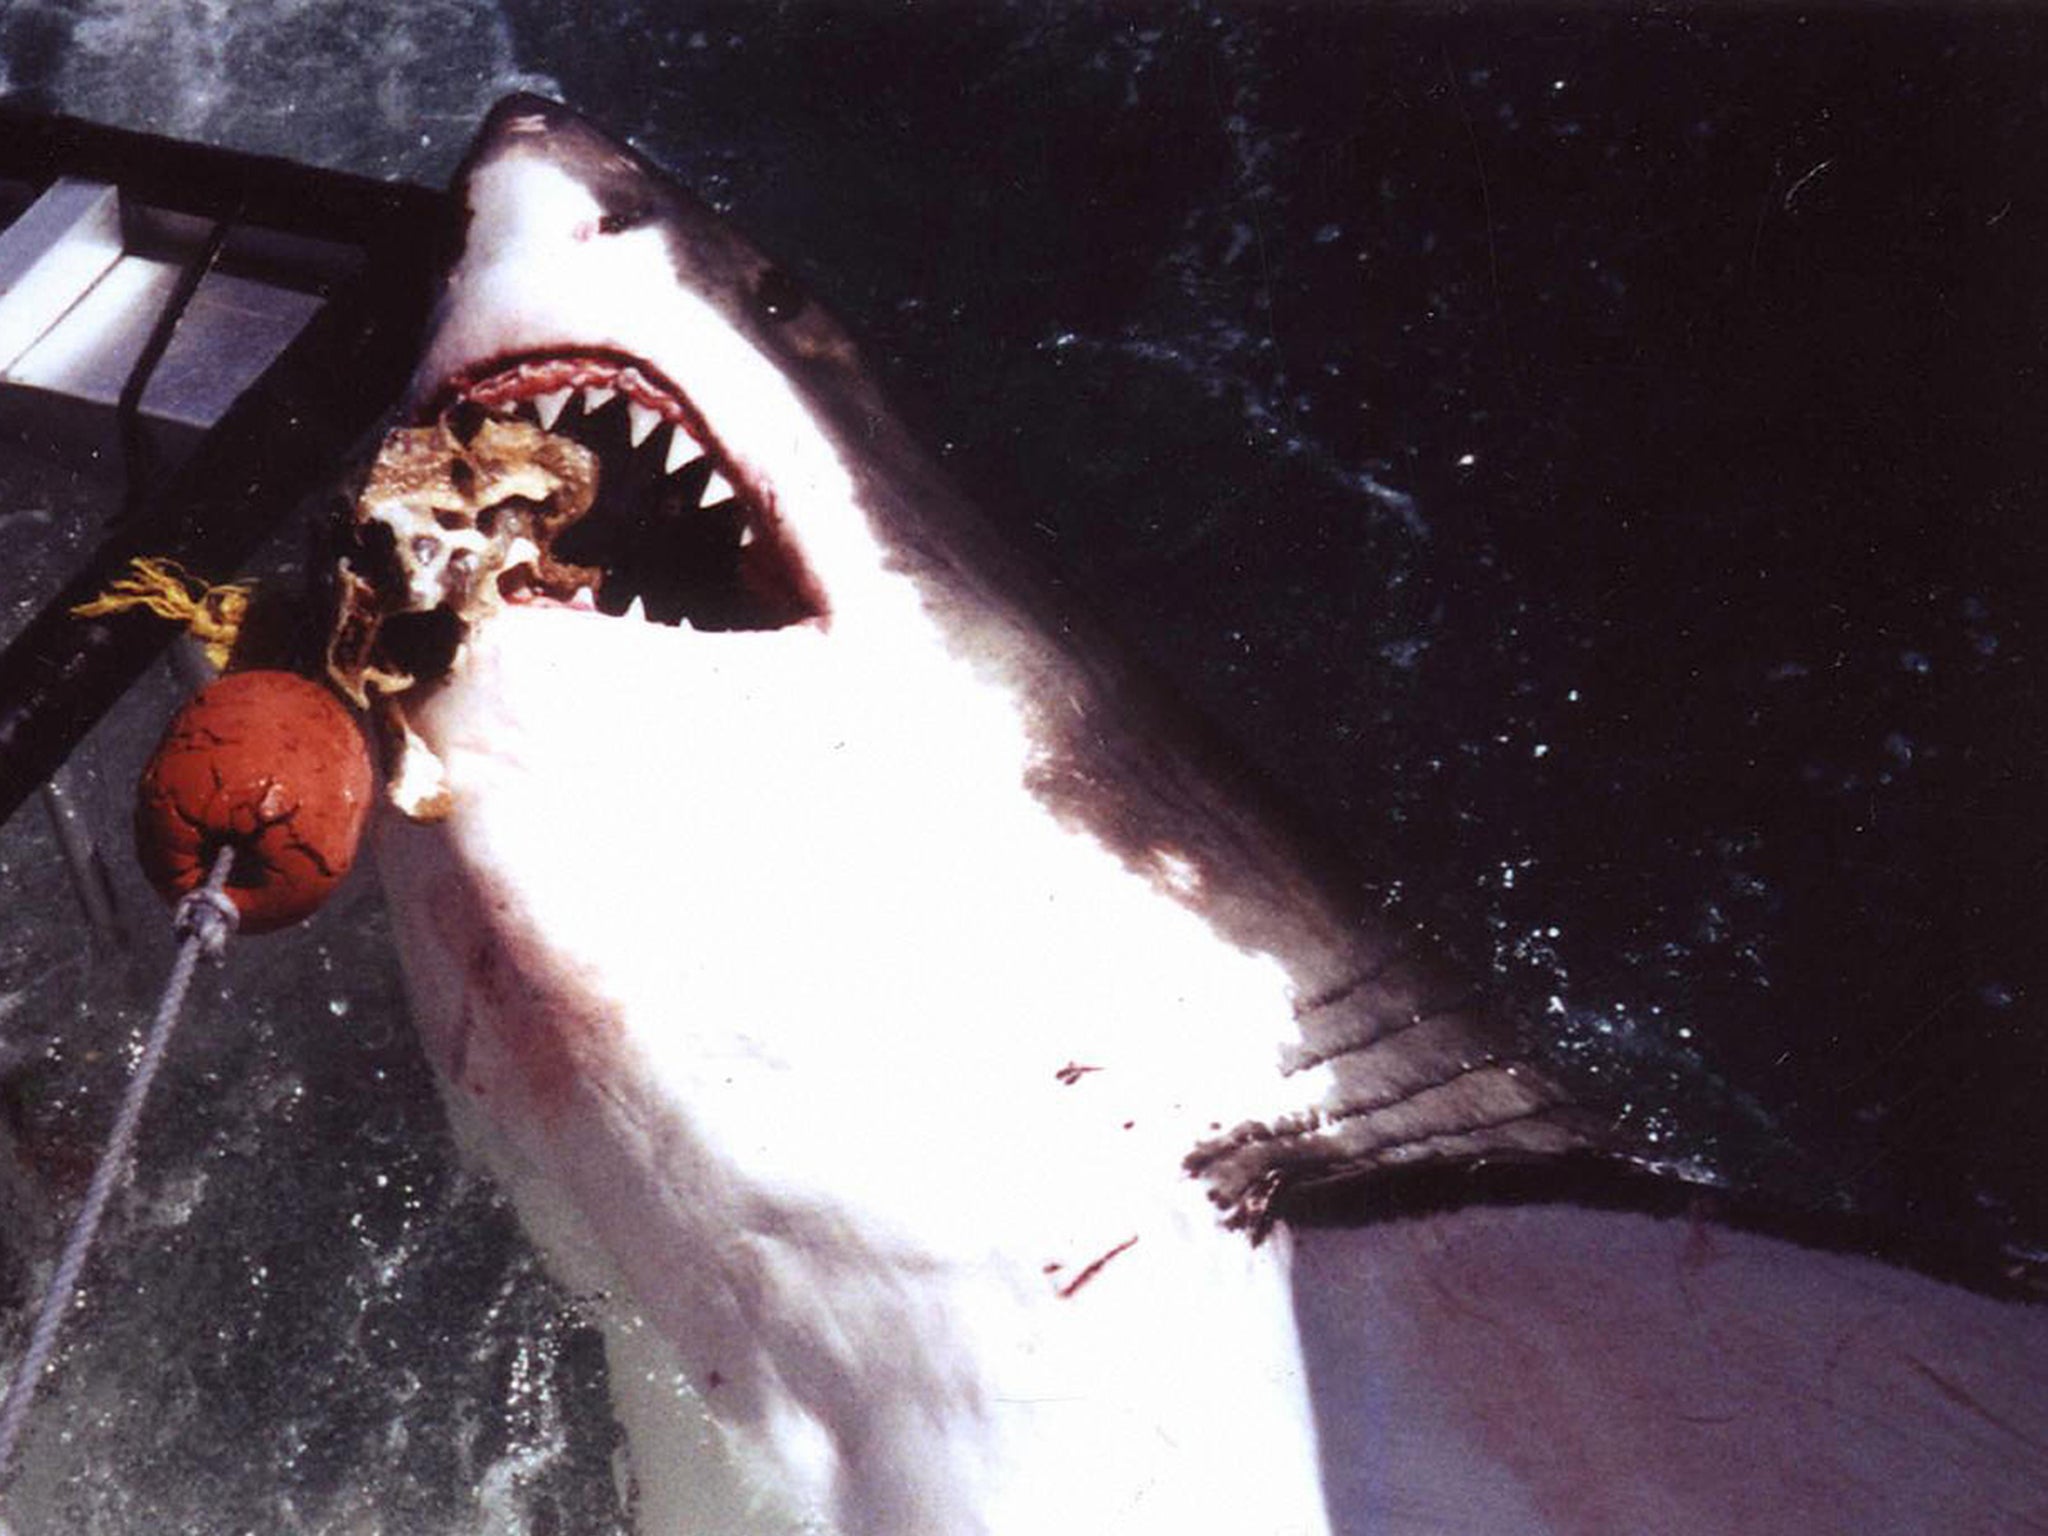 The controversial action will see fishermen catching and killing great white sharks that come to close to beaches.